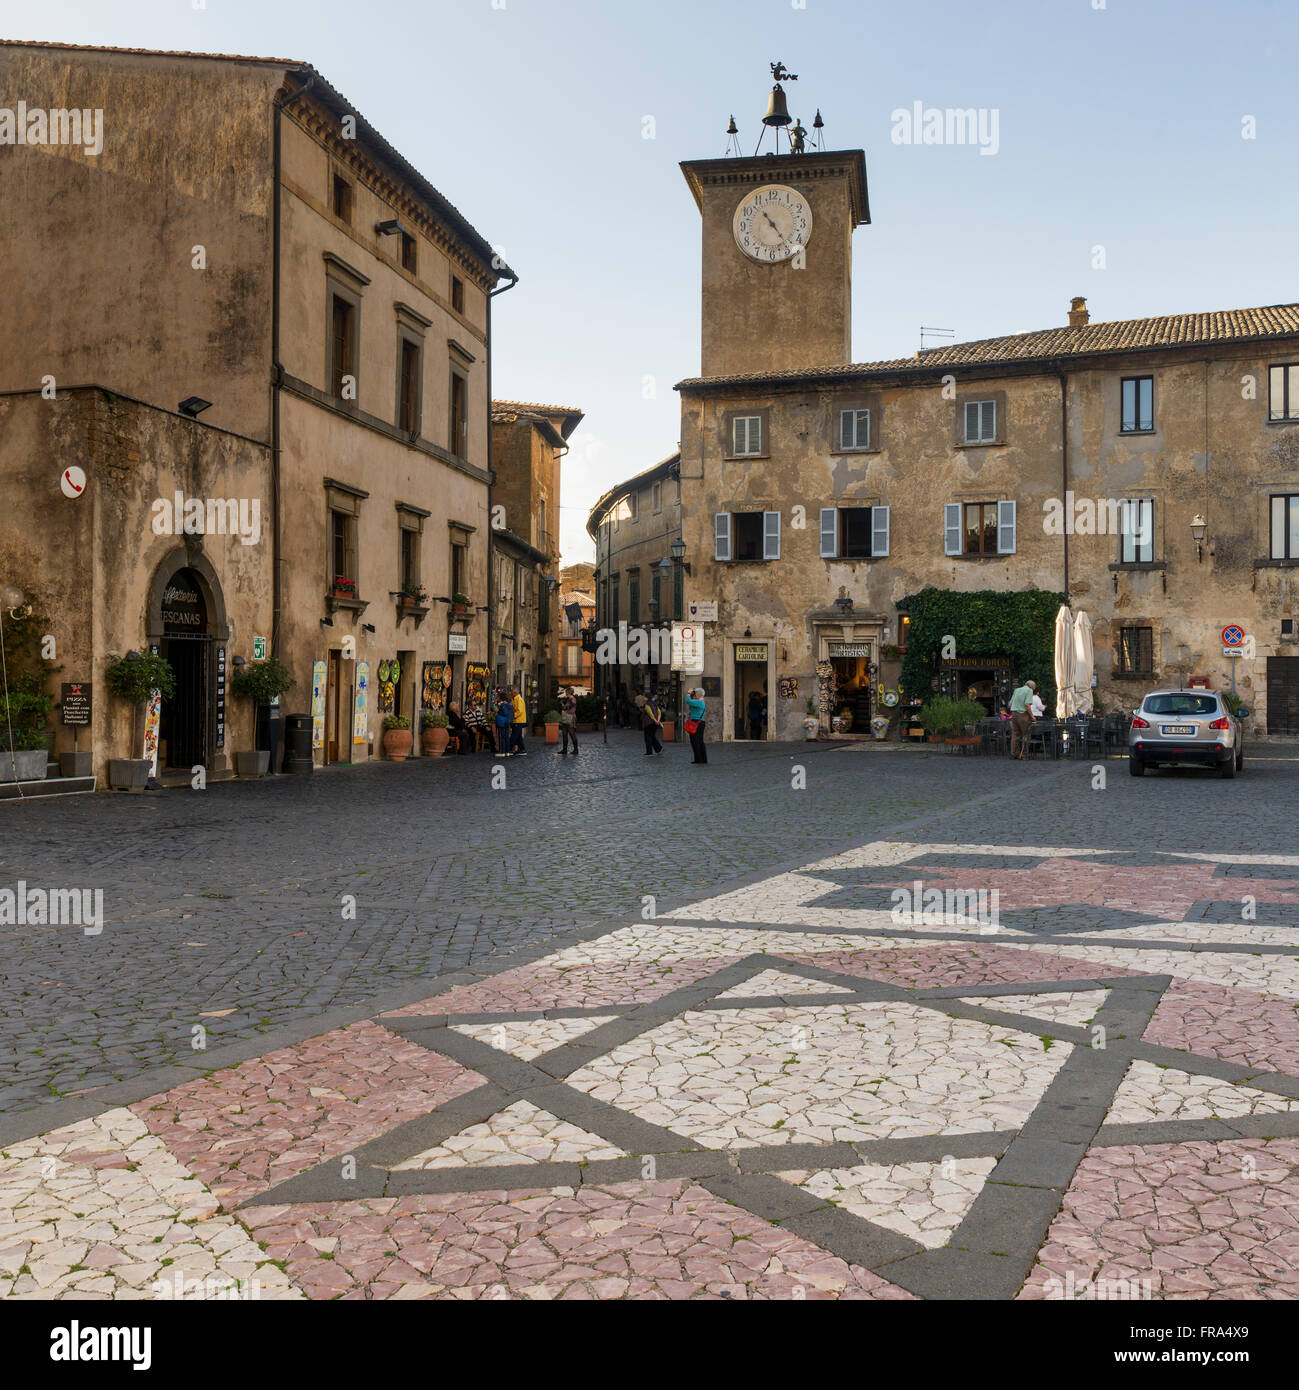 Clock tower and decorative stonework in star of david design on the street; Orvieto, Umbria, Italy Stock Photo